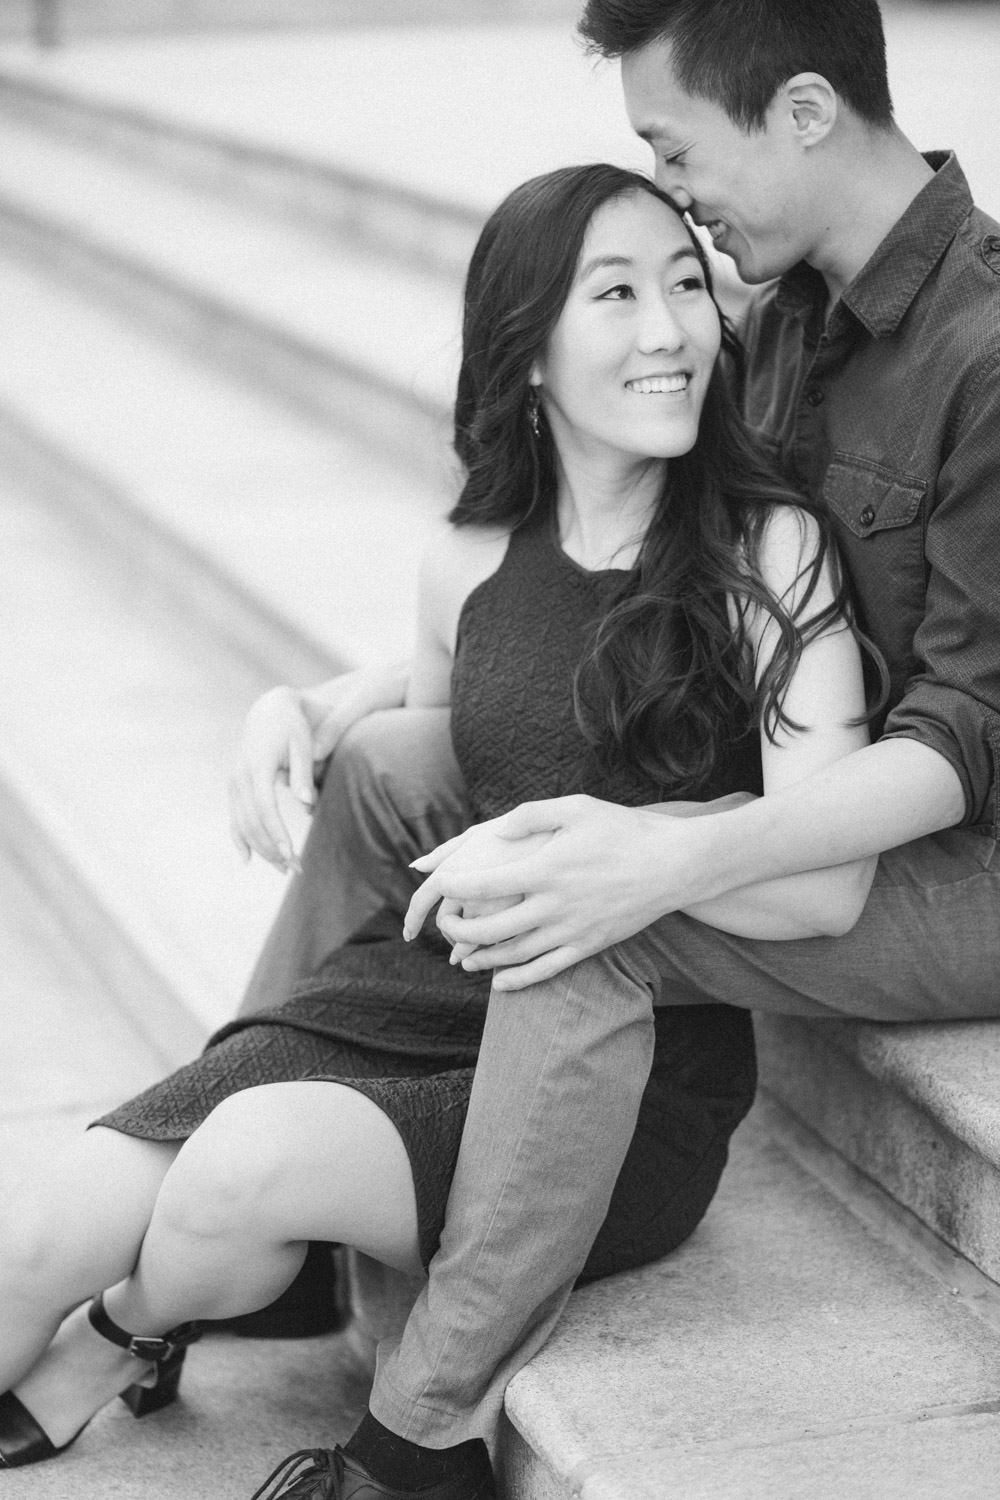 downtown chicago engagement session